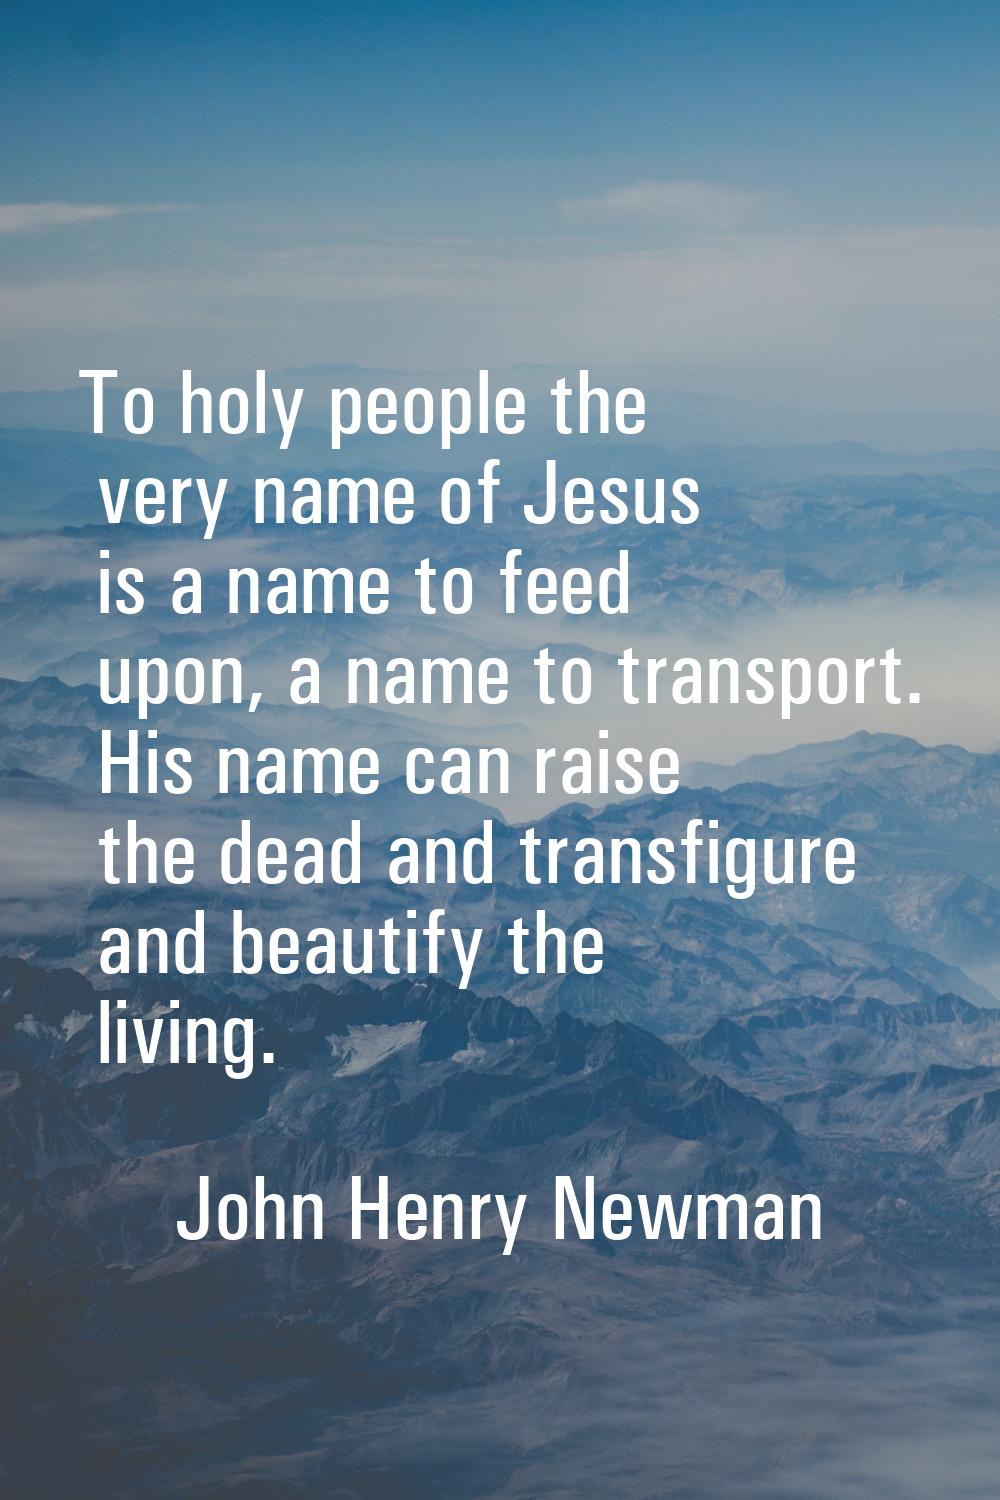 To holy people the very name of Jesus is a name to feed upon, a name to transport. His name can rai